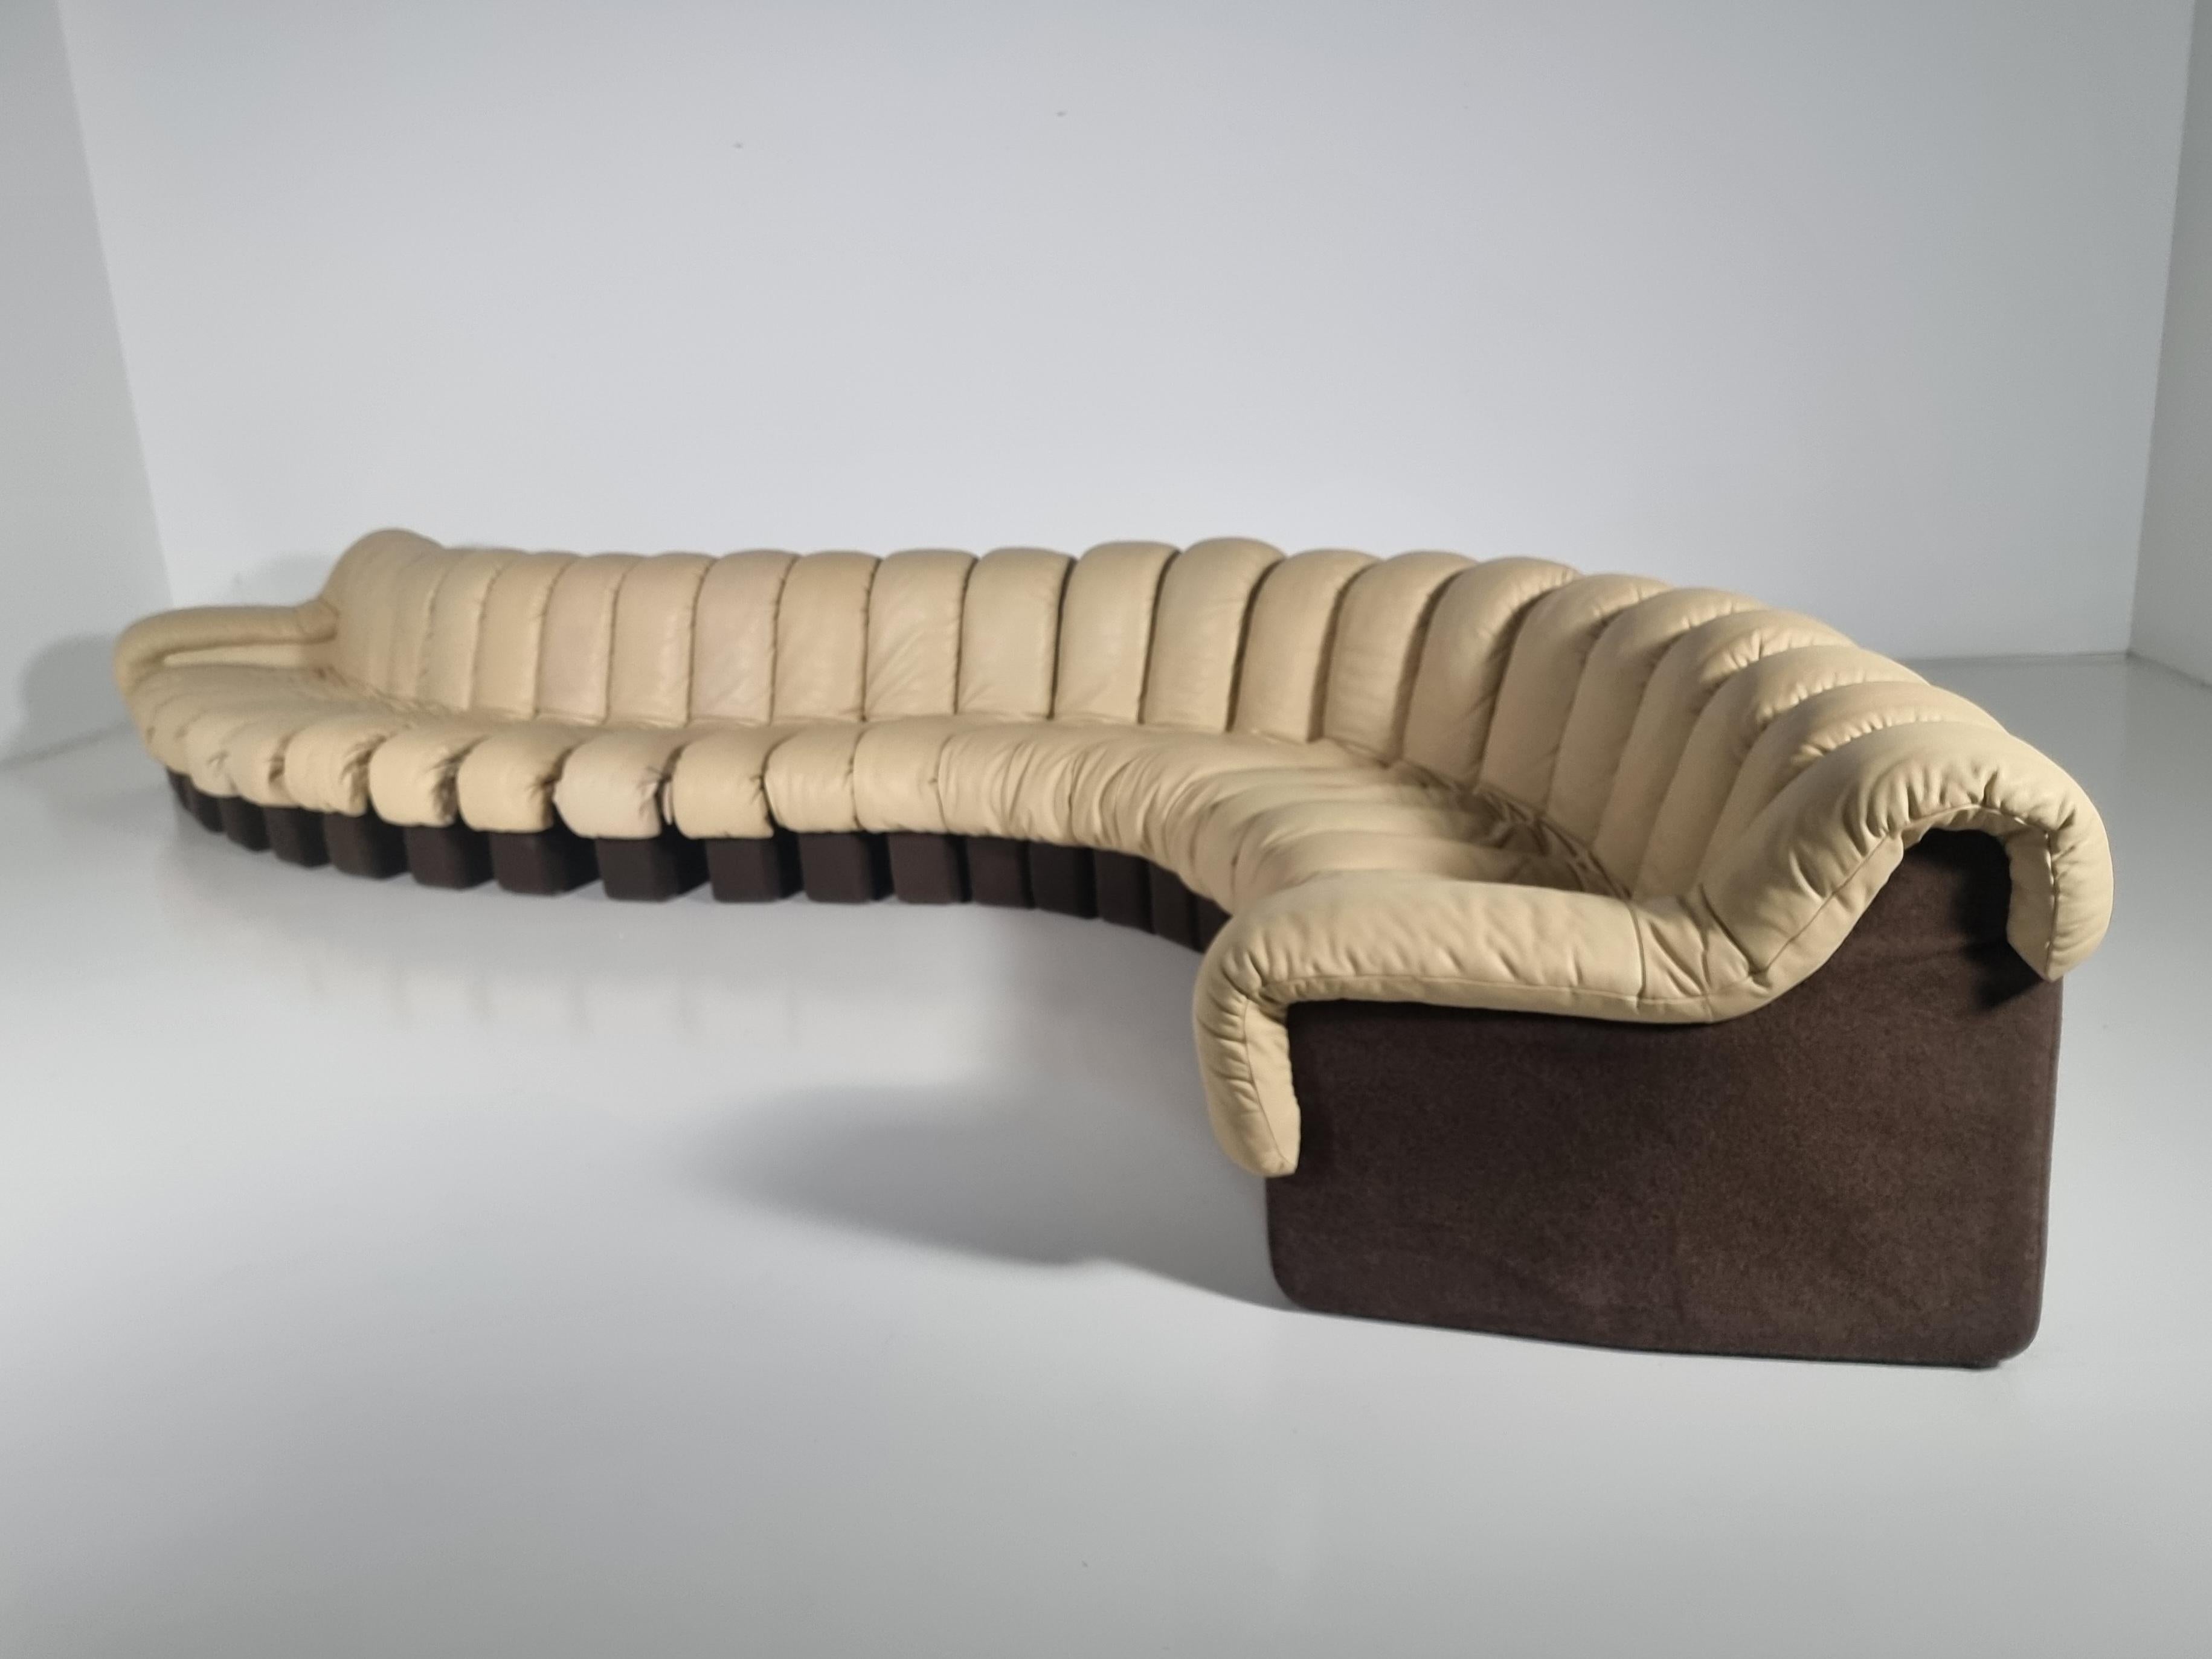 Late 20th Century Ds-600 'Snake' Sofa in Original cream Leather by De Sede Switzerland, 1970s